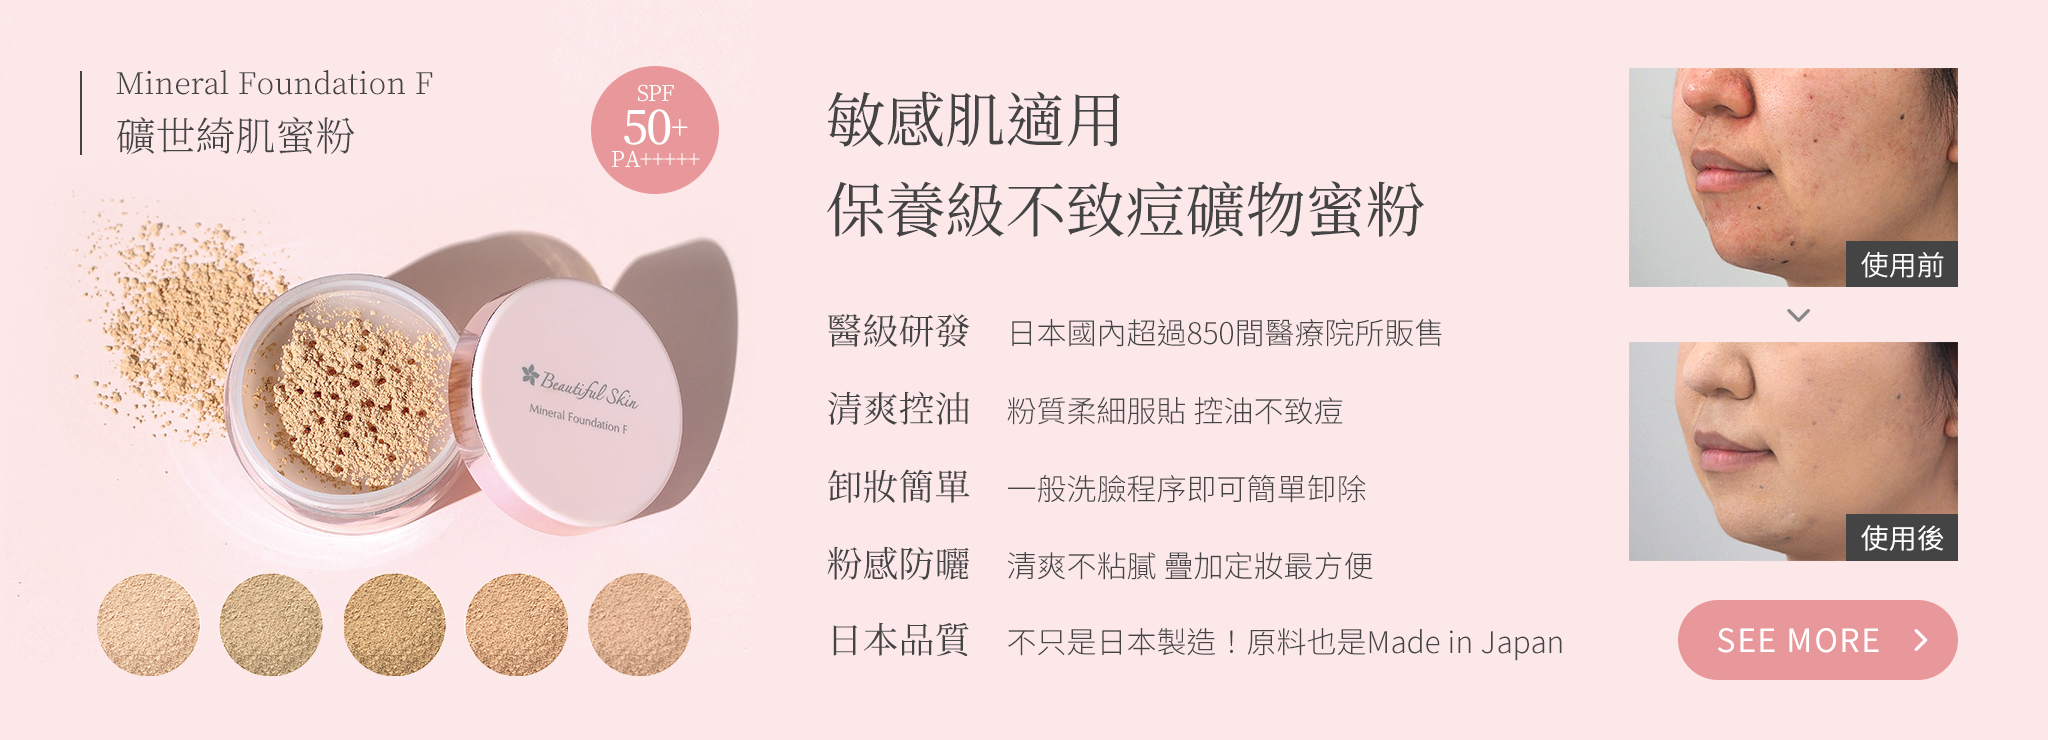 Mineral Foundation F 礦世綺肌蜜粉